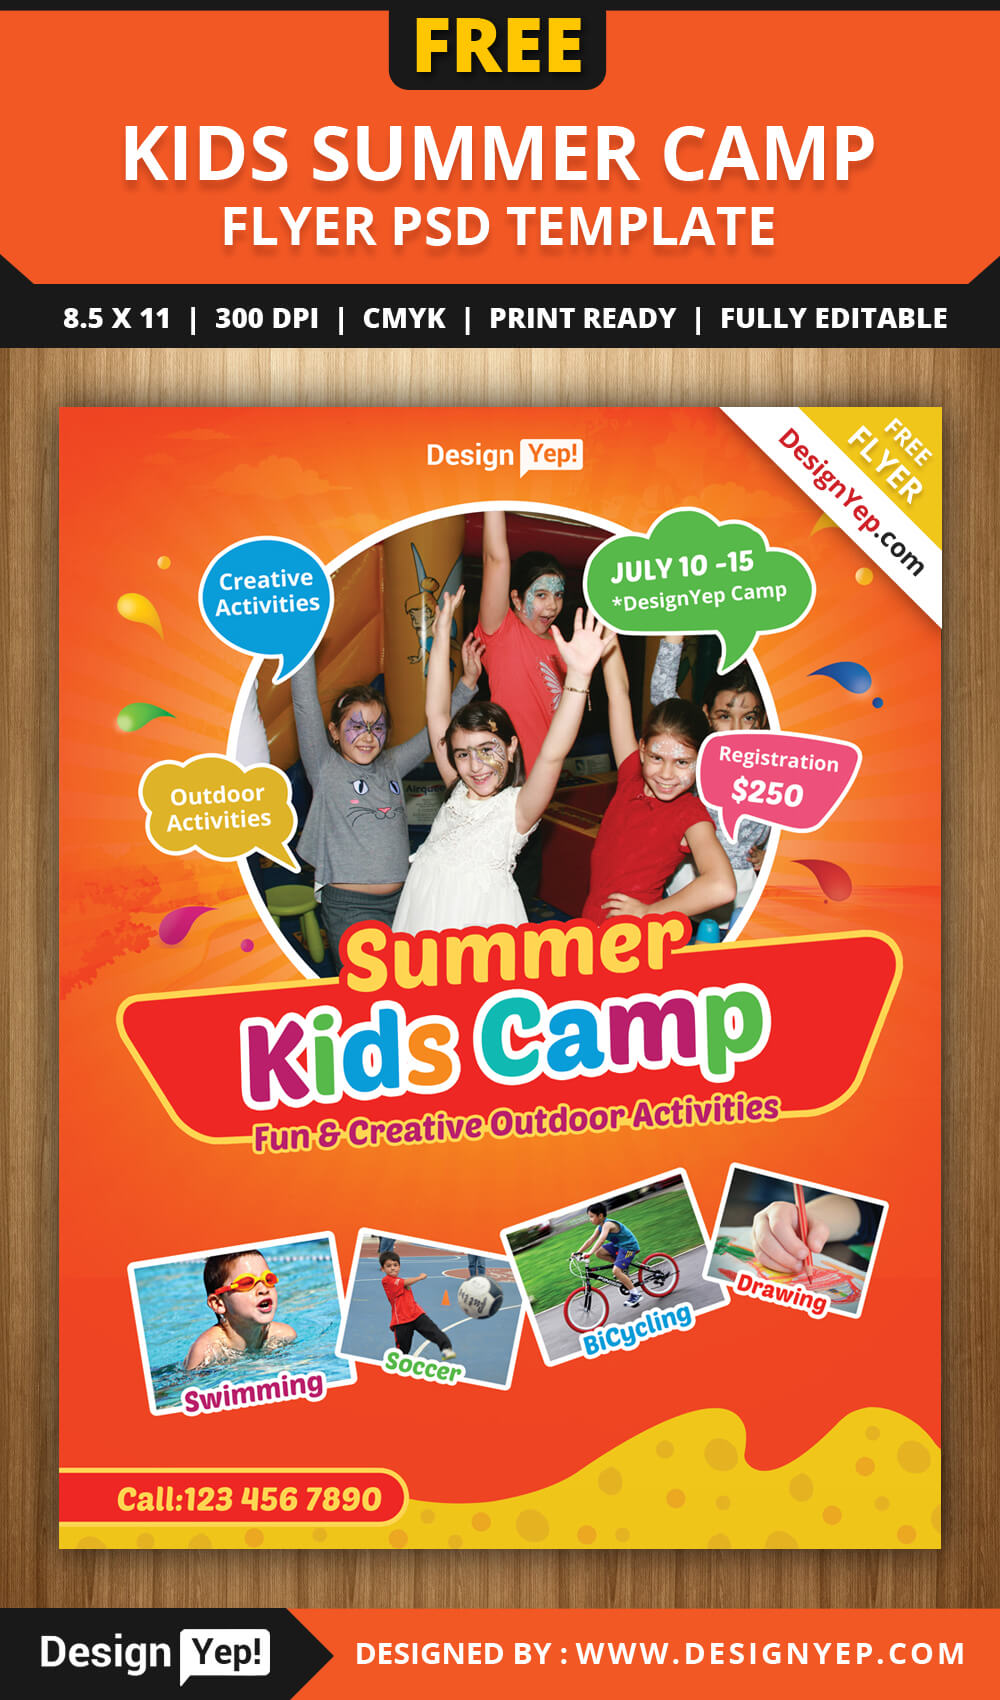 Free Kids Summer Camp Flyer Psd Template On Behance Within Summer Camp Brochure Template Free Download